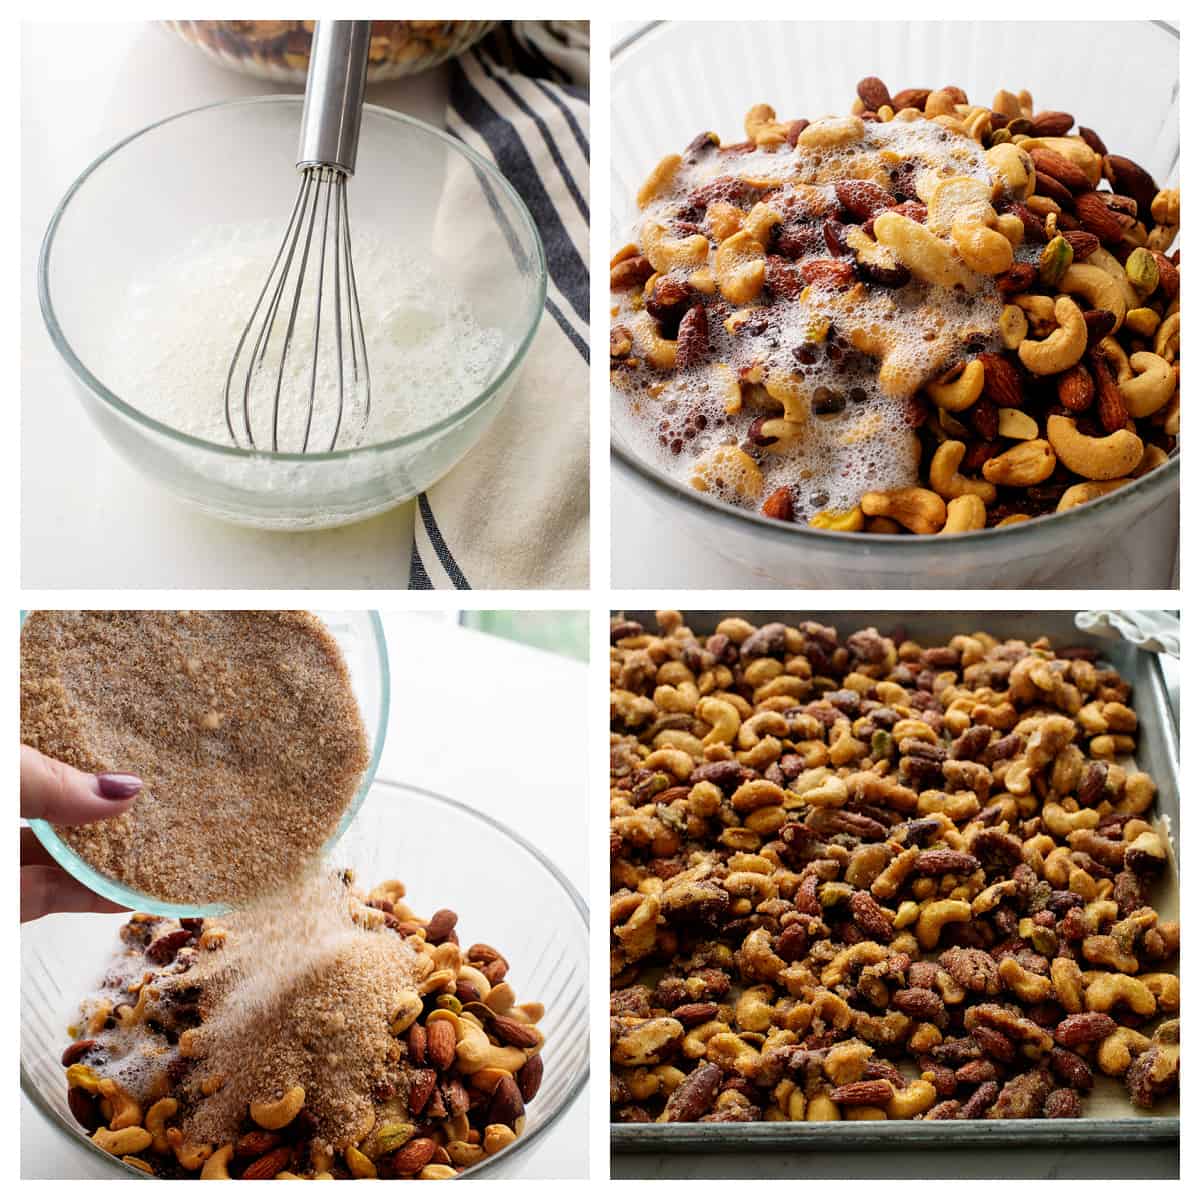 Collage showing how to make candied nuts.